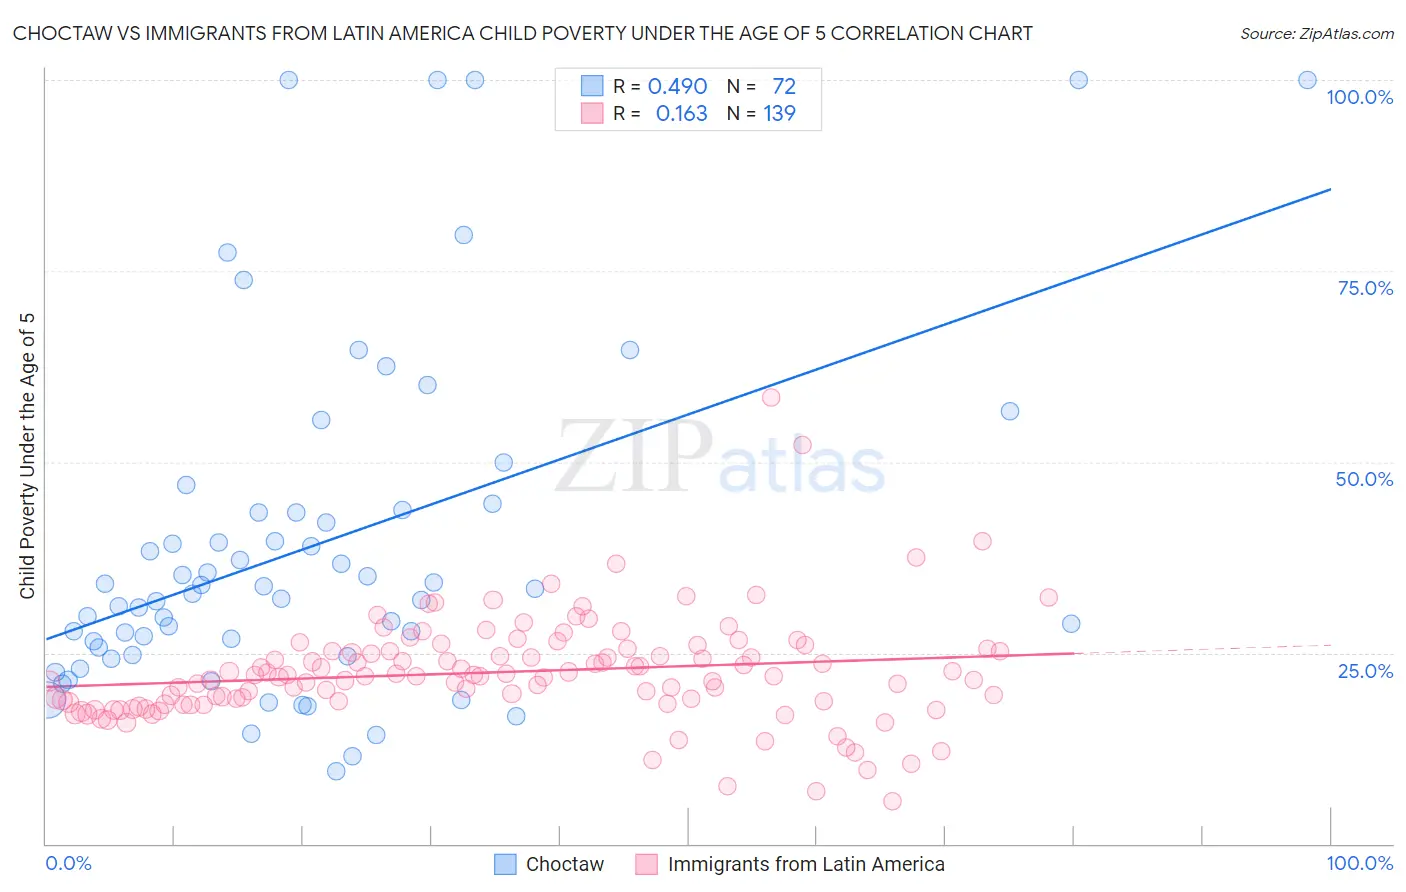 Choctaw vs Immigrants from Latin America Child Poverty Under the Age of 5